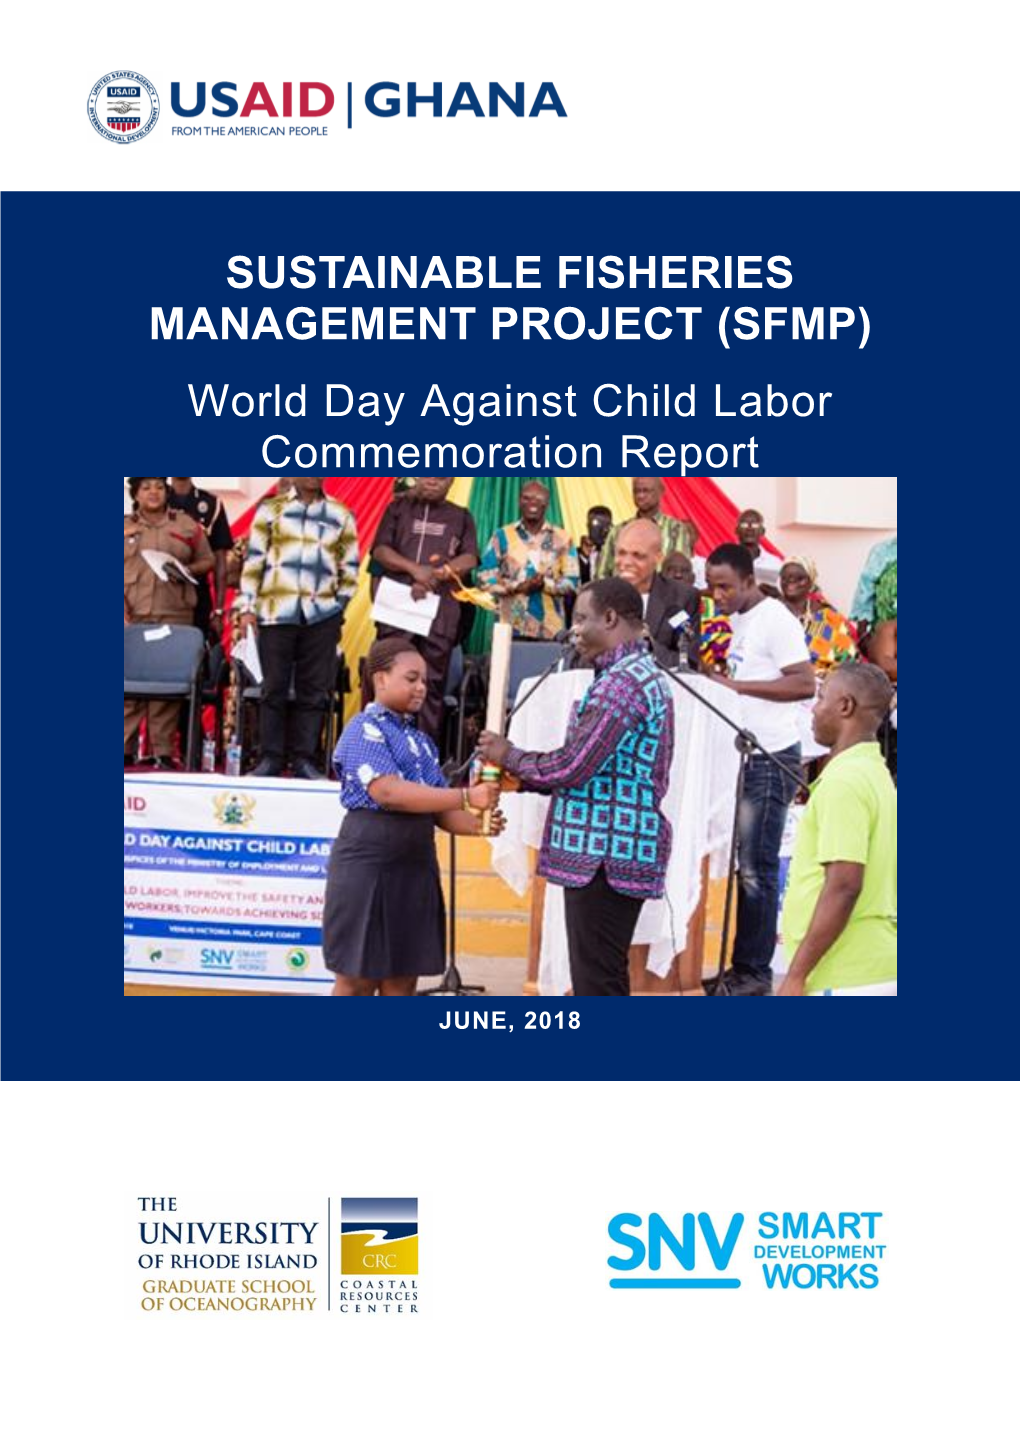 World Day Against Child Labor Commemoration Report